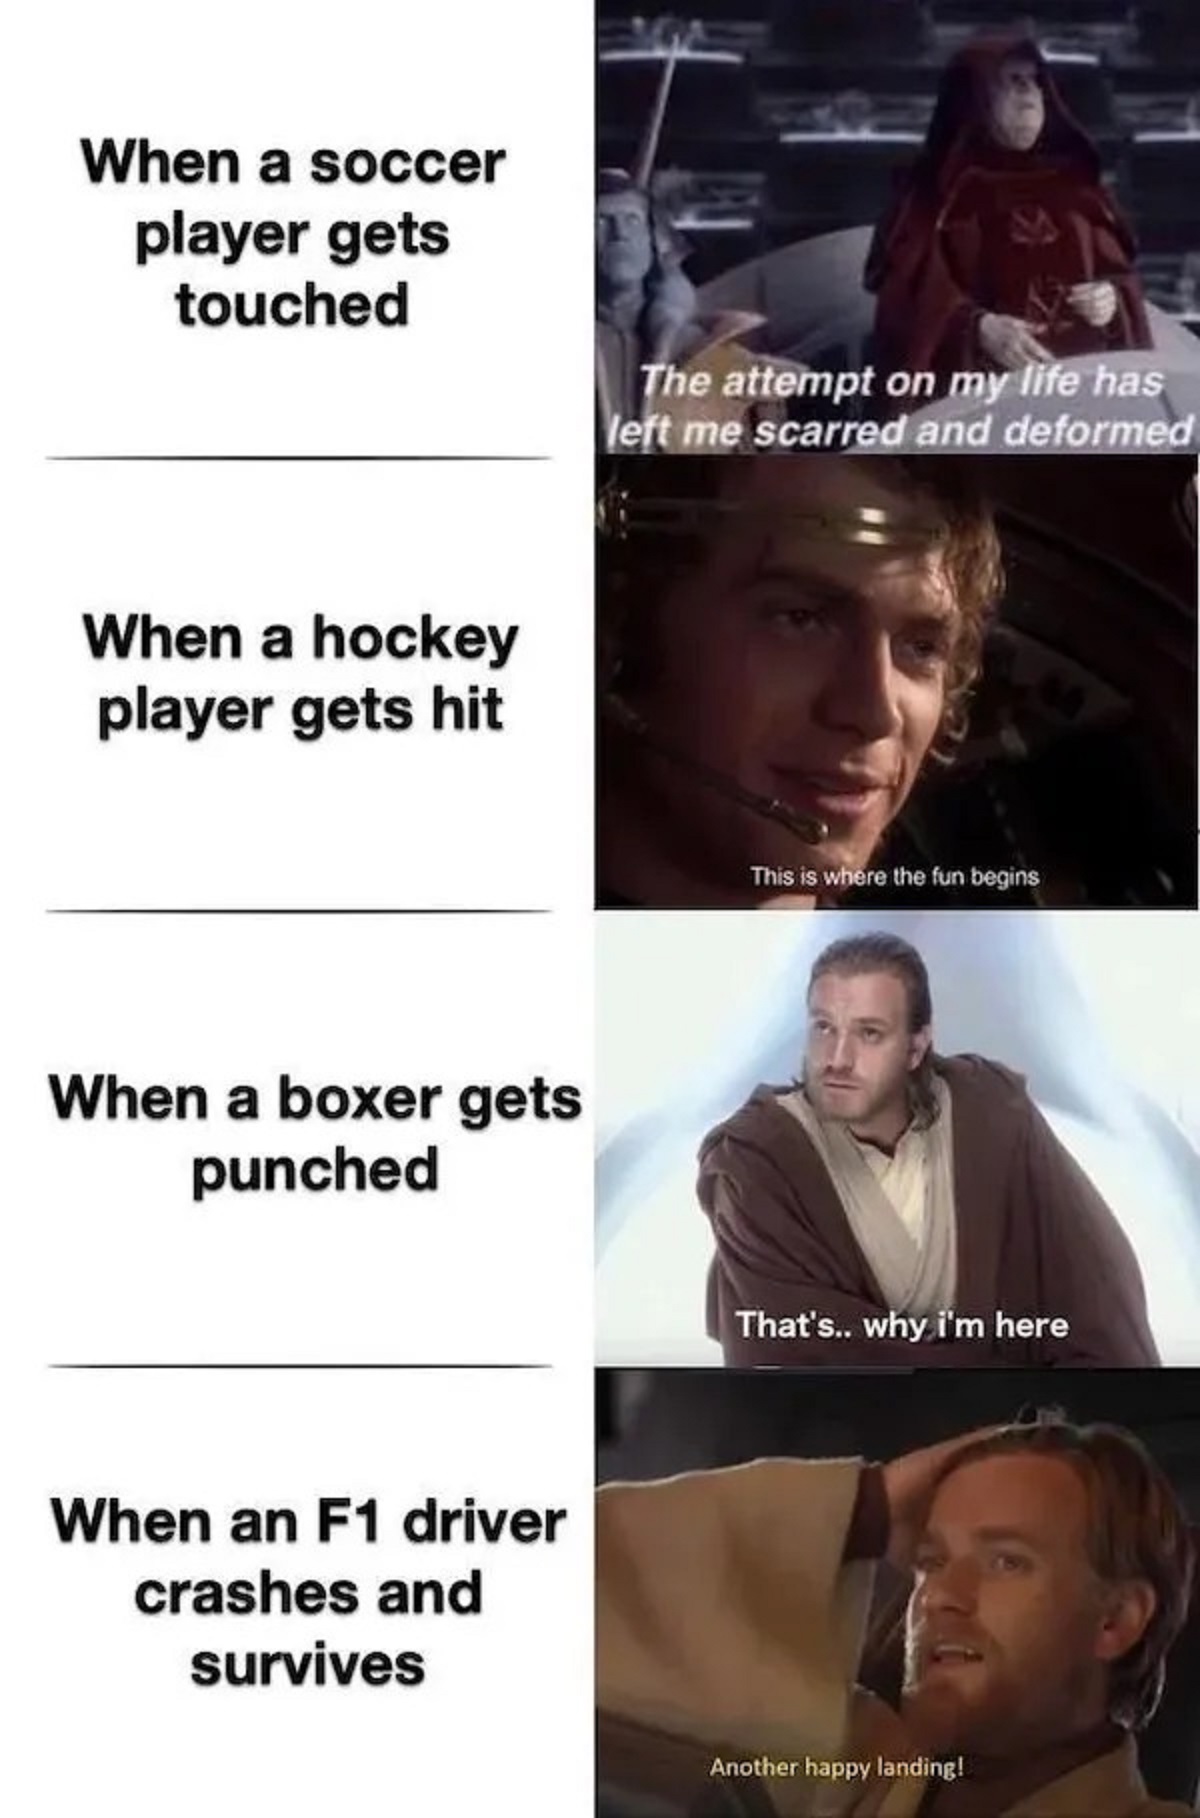 prequel memes - When a soccer player gets touched When a hockey player gets hit When a boxer gets punched When an F1 driver crashes and survives The attempt on my life has left me scarred and deformed This is where the fun begins That's.. why i'm here Ano